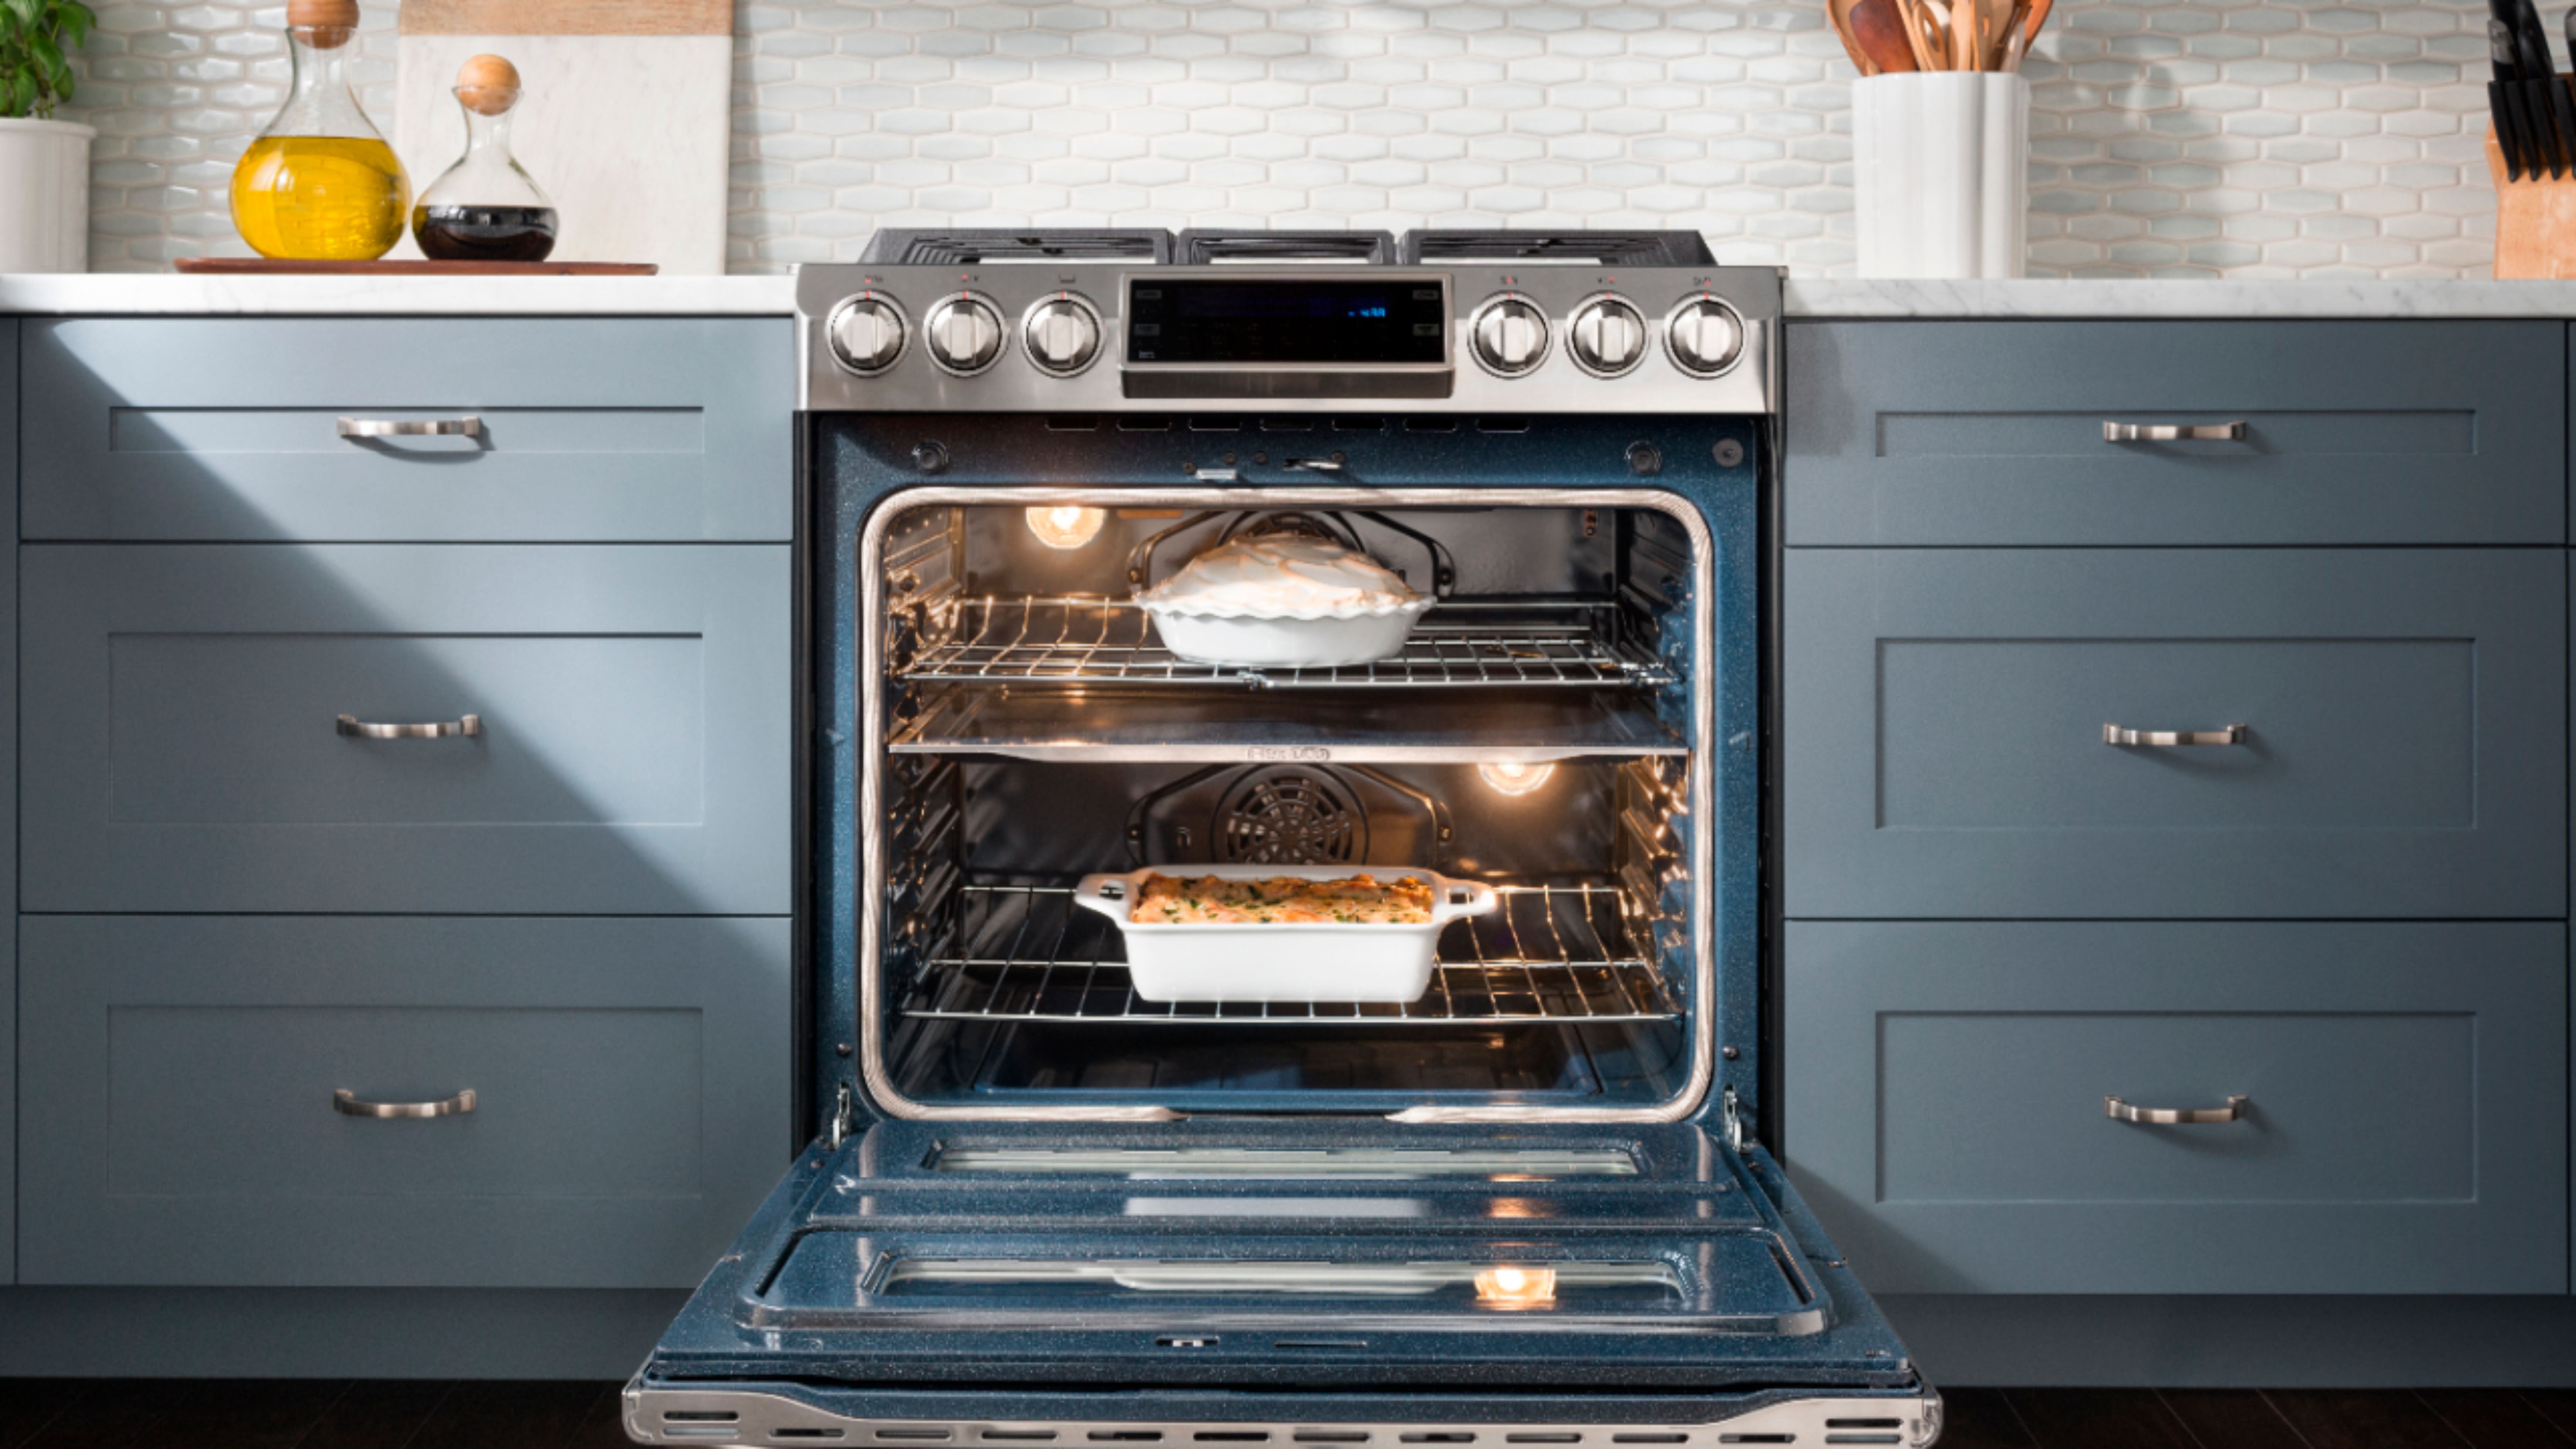 NE58K9500SG by Samsung - 5.8 cu. ft. Slide-in Electric Range with Dual  Convection in Black Stainless Steel